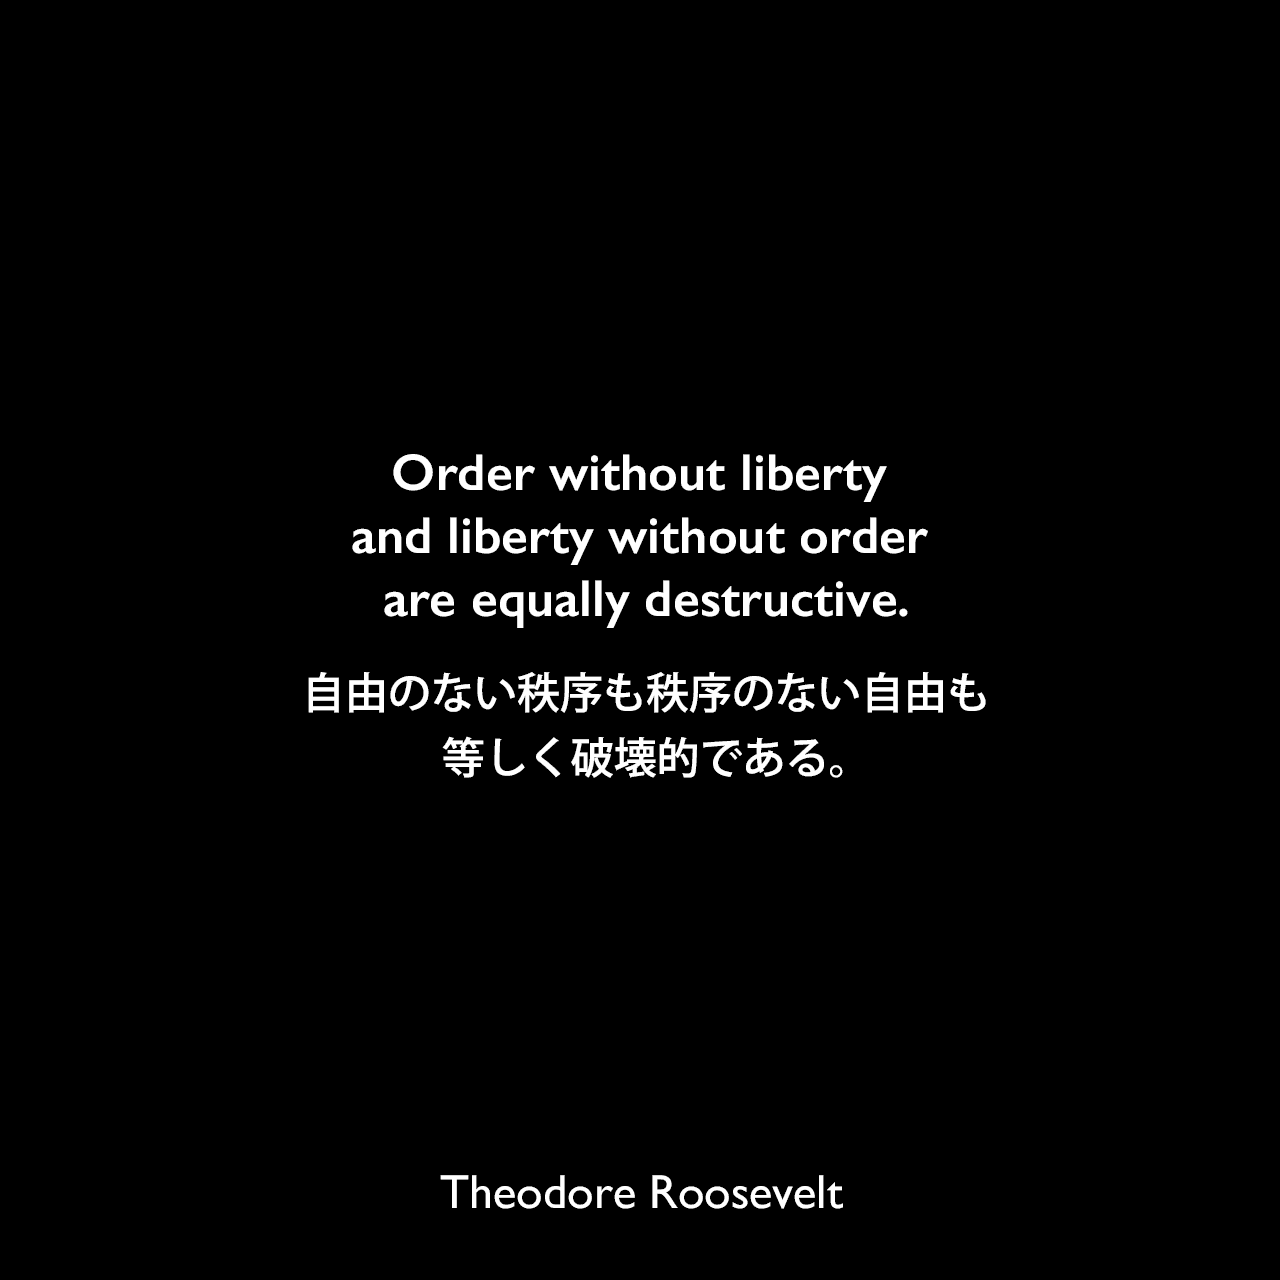 Order without liberty and liberty without order are equally destructive.自由のない秩序も秩序のない自由も等しく破壊的である。Theodore Roosevelt